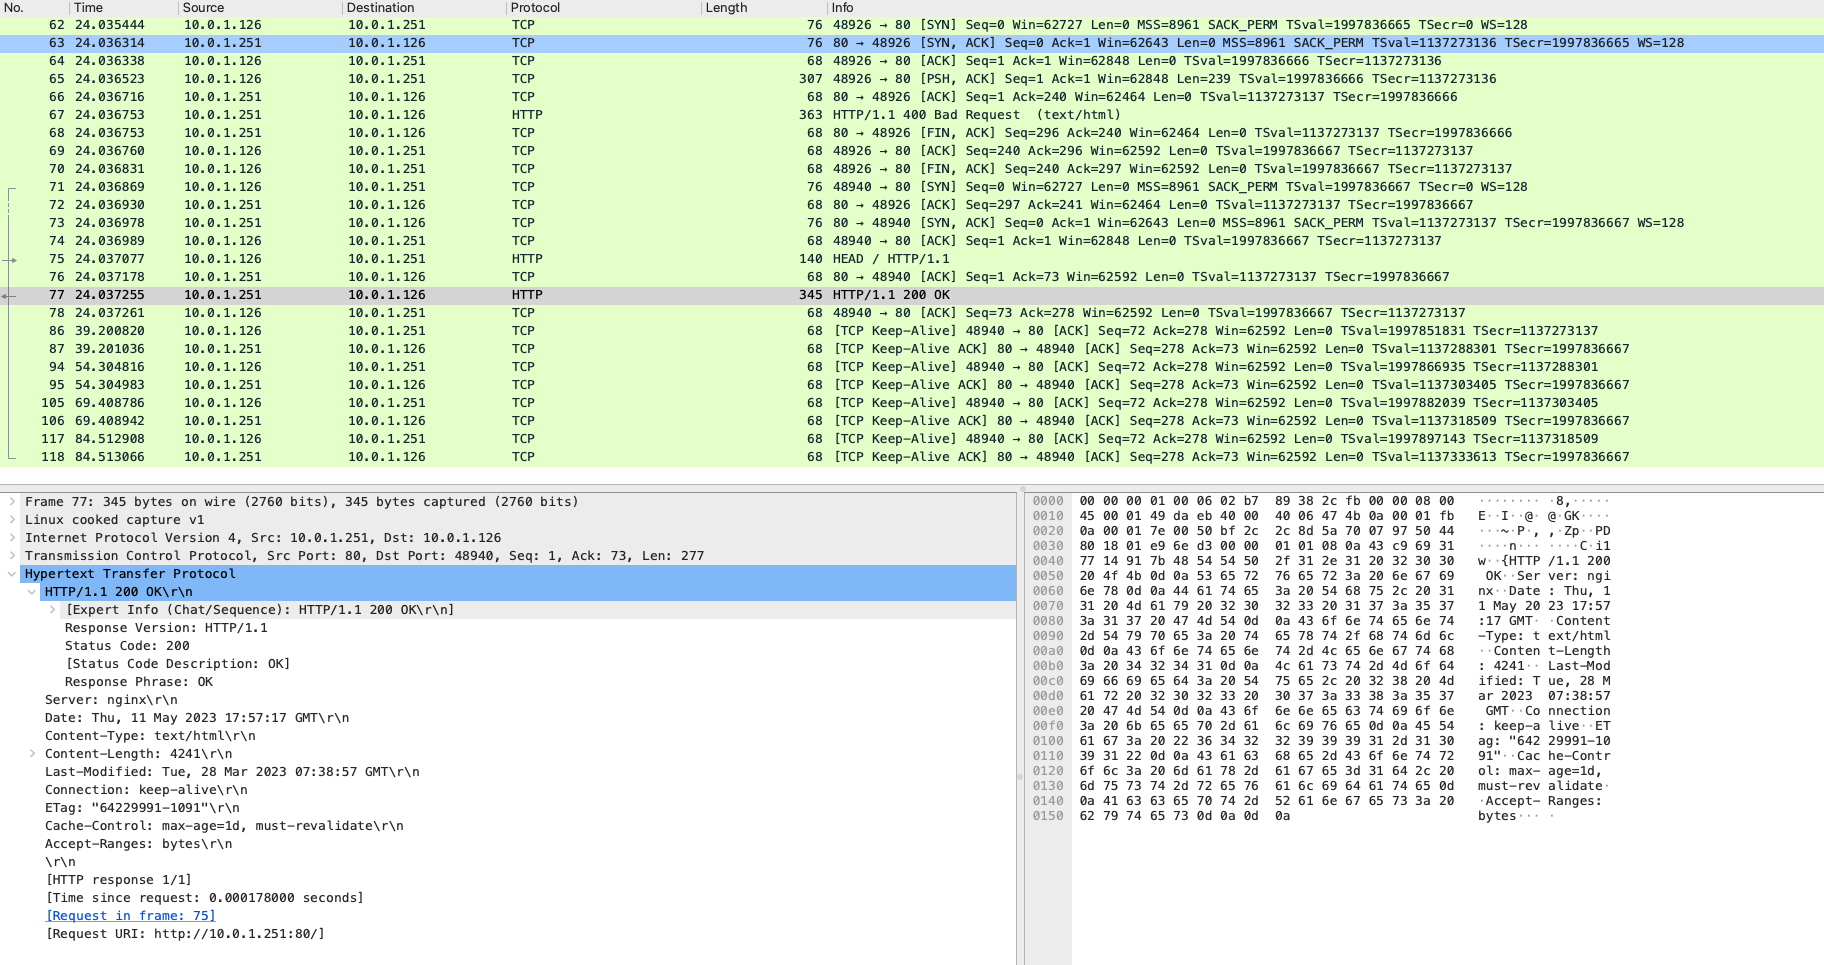 Wireshark capture when ICMP is disabled